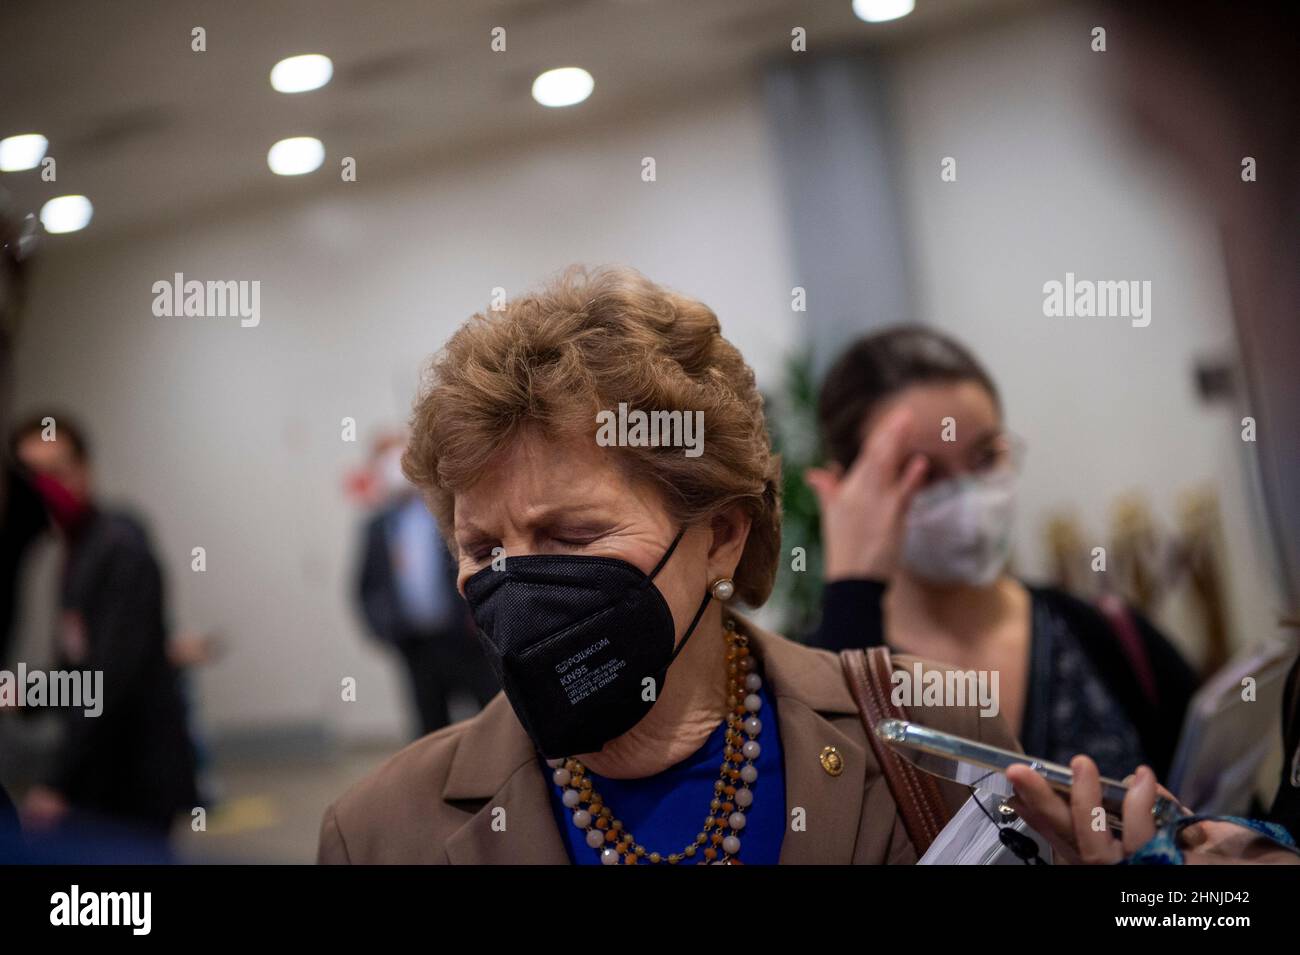 United States Senator Jeanne Shaheen (Democrat of New Hampshire) talks to reporters as he walks through the Senate subway during a vote at the US Capitol in Washington, DC, Wednesday, February 16, 2022. Credit: Rod Lamkey / CNP/Sipa USA Stock Photo